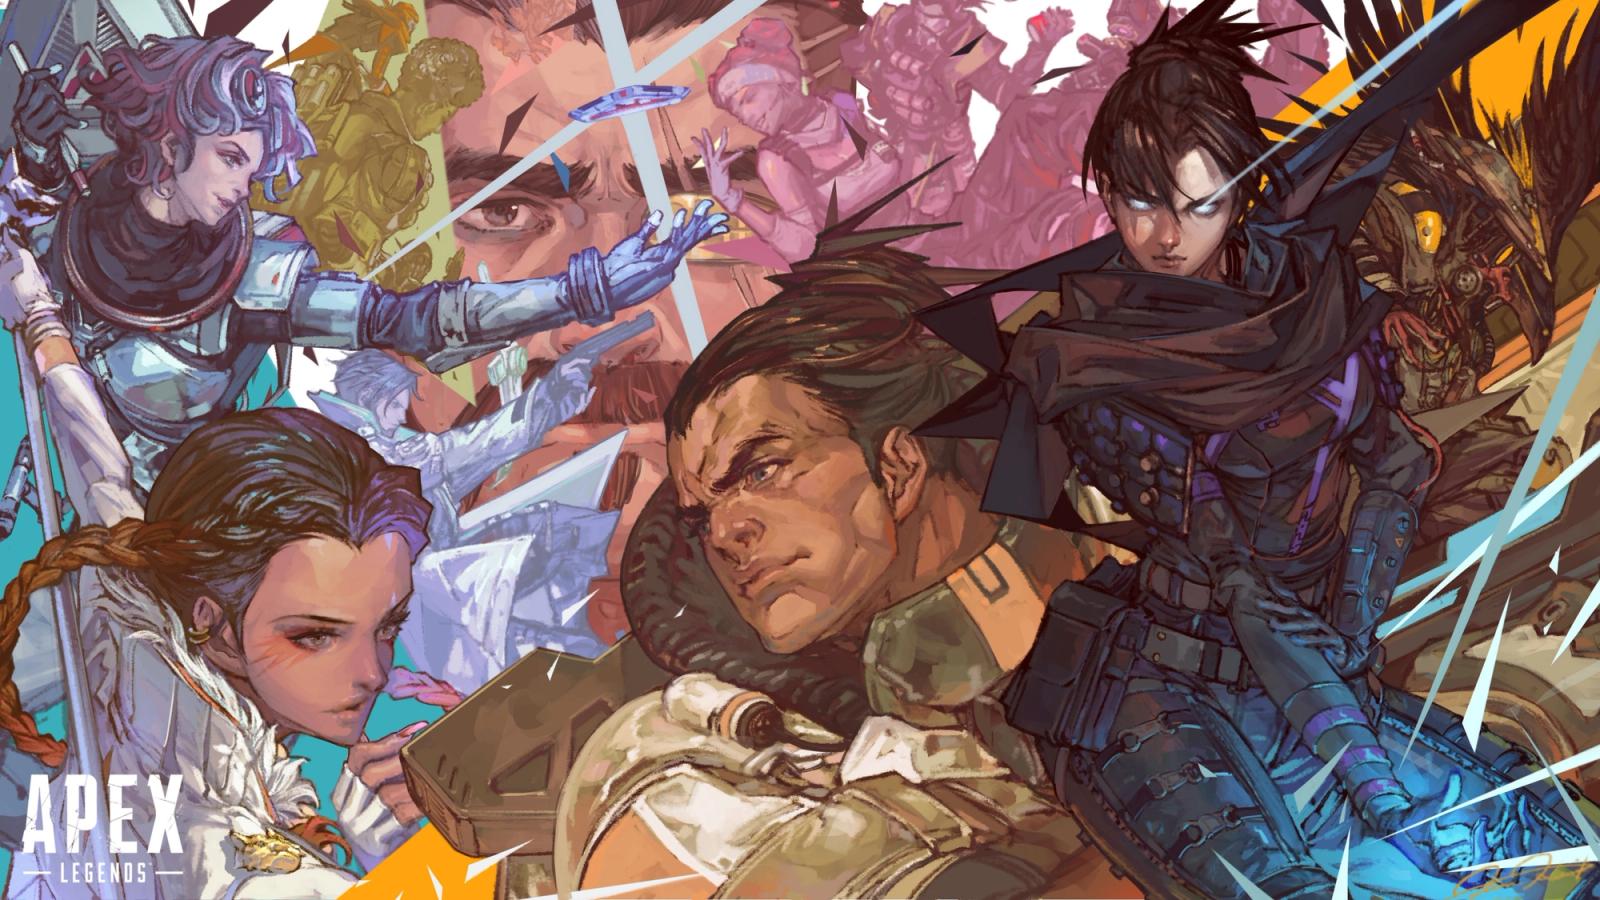 Apex Legends characters in an anime style